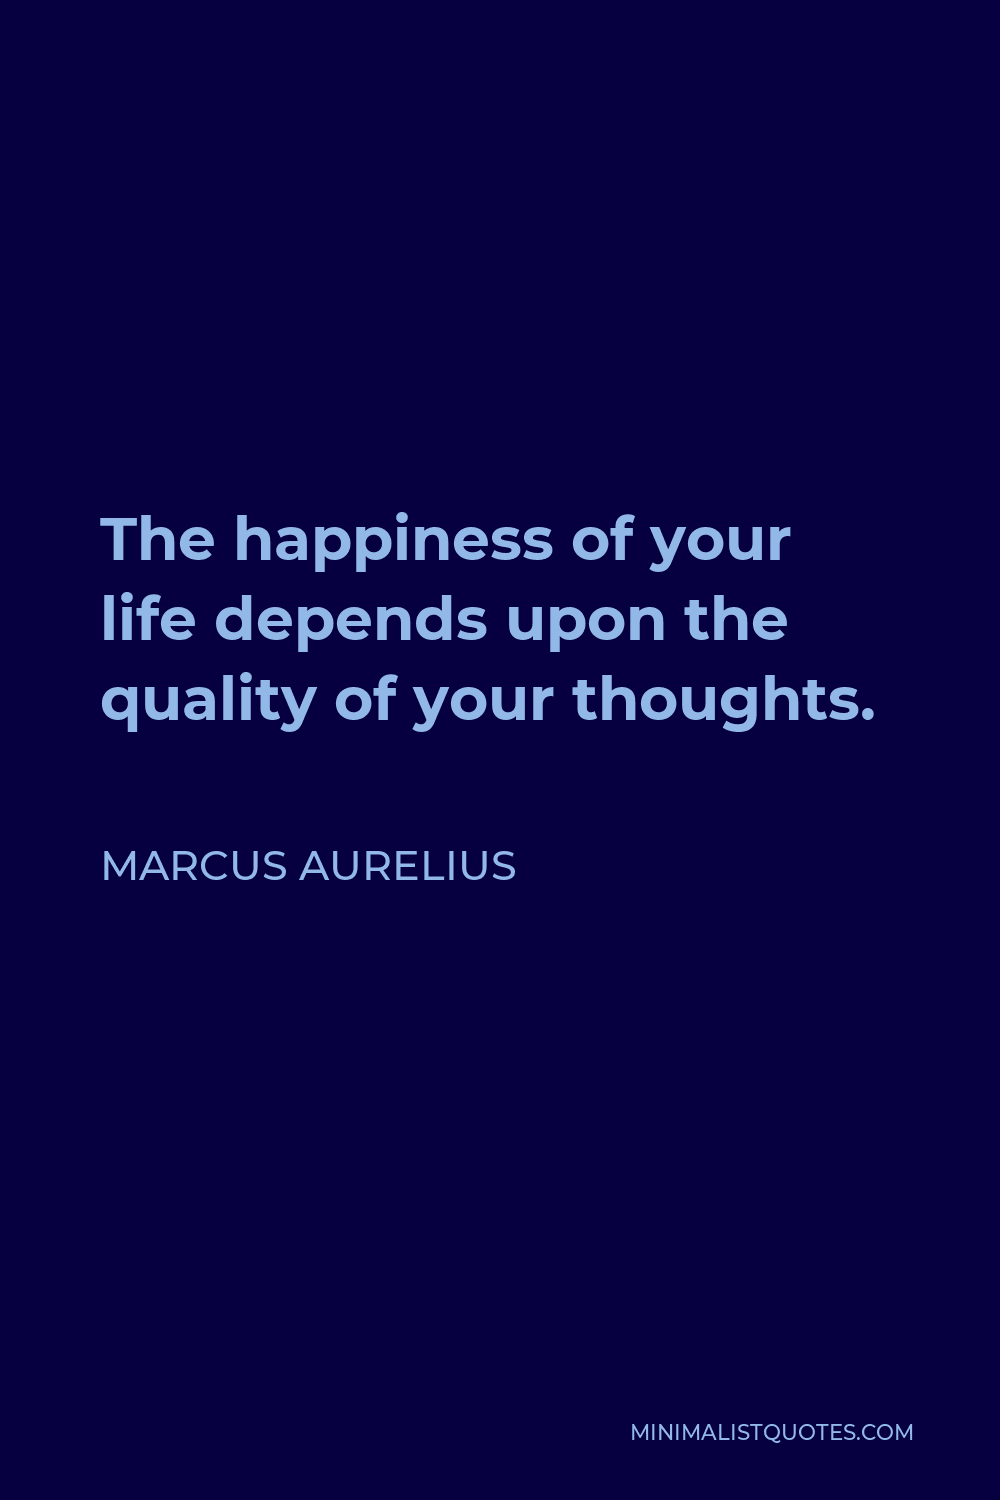 Marcus Aurelius Quote - The happiness of your life depends upon the quality of your thoughts.